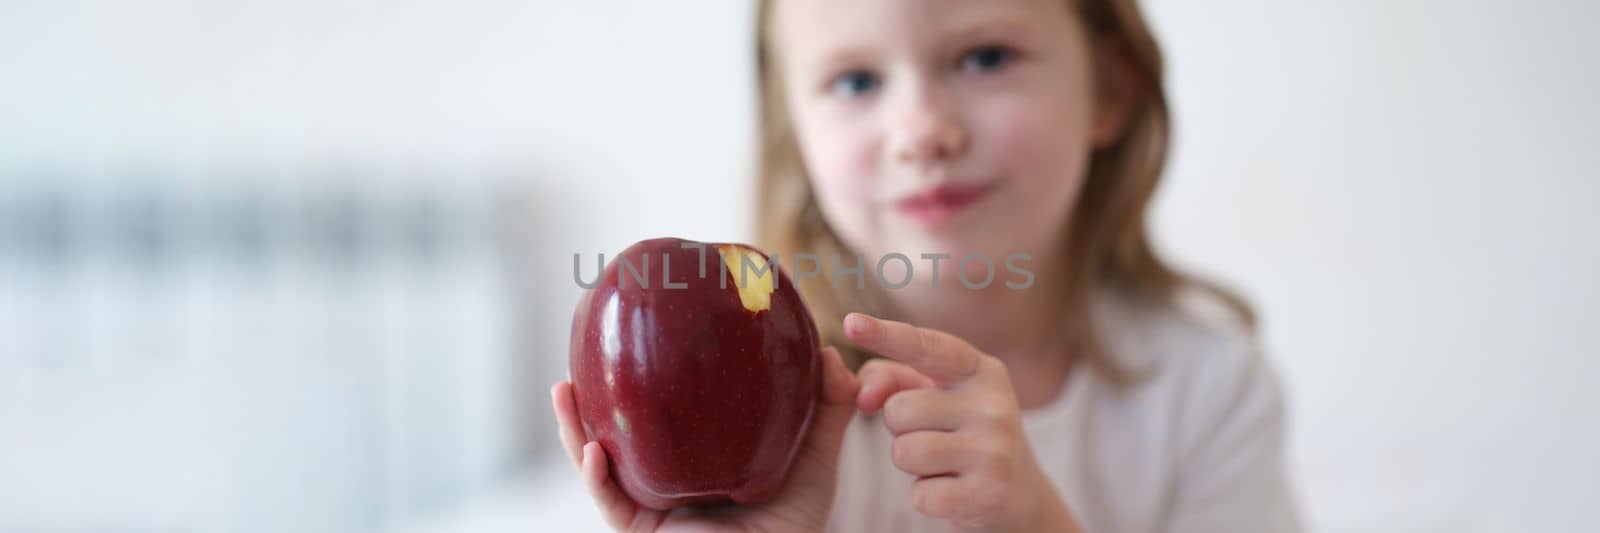 Girl child bites and eats big red apple. Healthy food for children